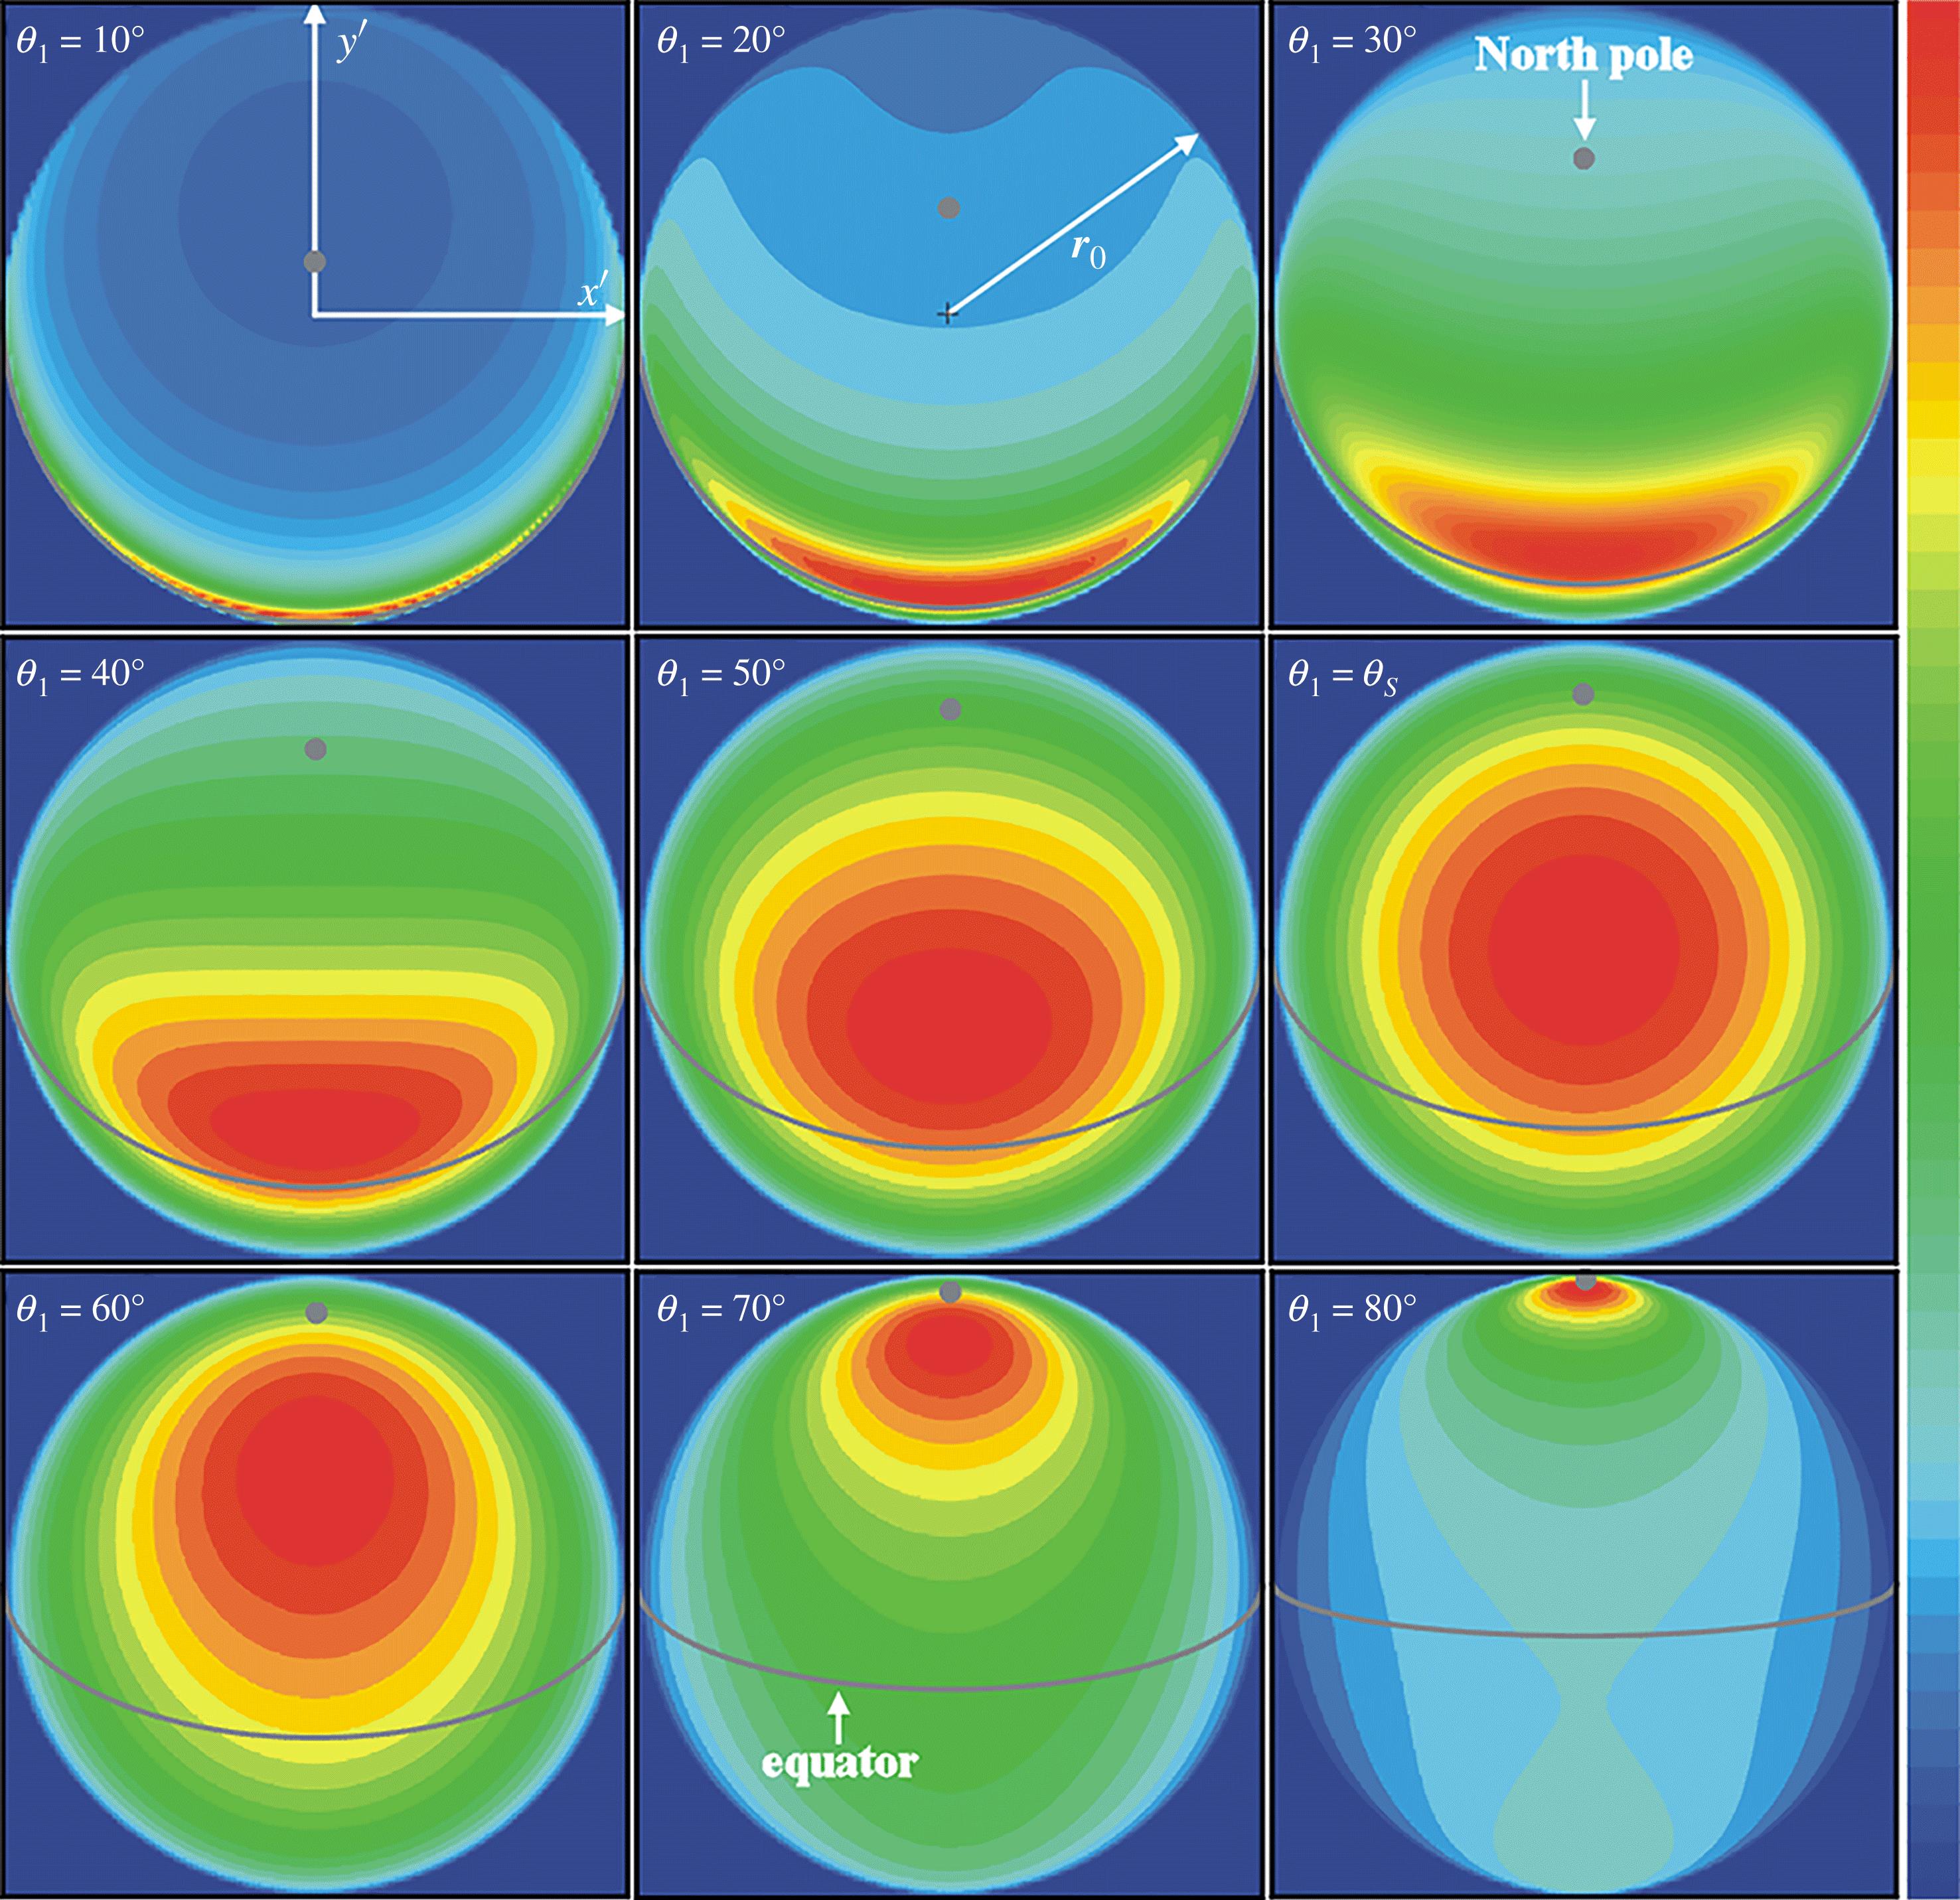 Optimal laser intensity profiles (north hemisphere) for an axially symmetric beam configuration. The intensity profiles have been normalized to one () and the scale colour ranges from 0 to 1. Full dots correspond to the north pole and the grey curve is the equator projection on the focal planes.